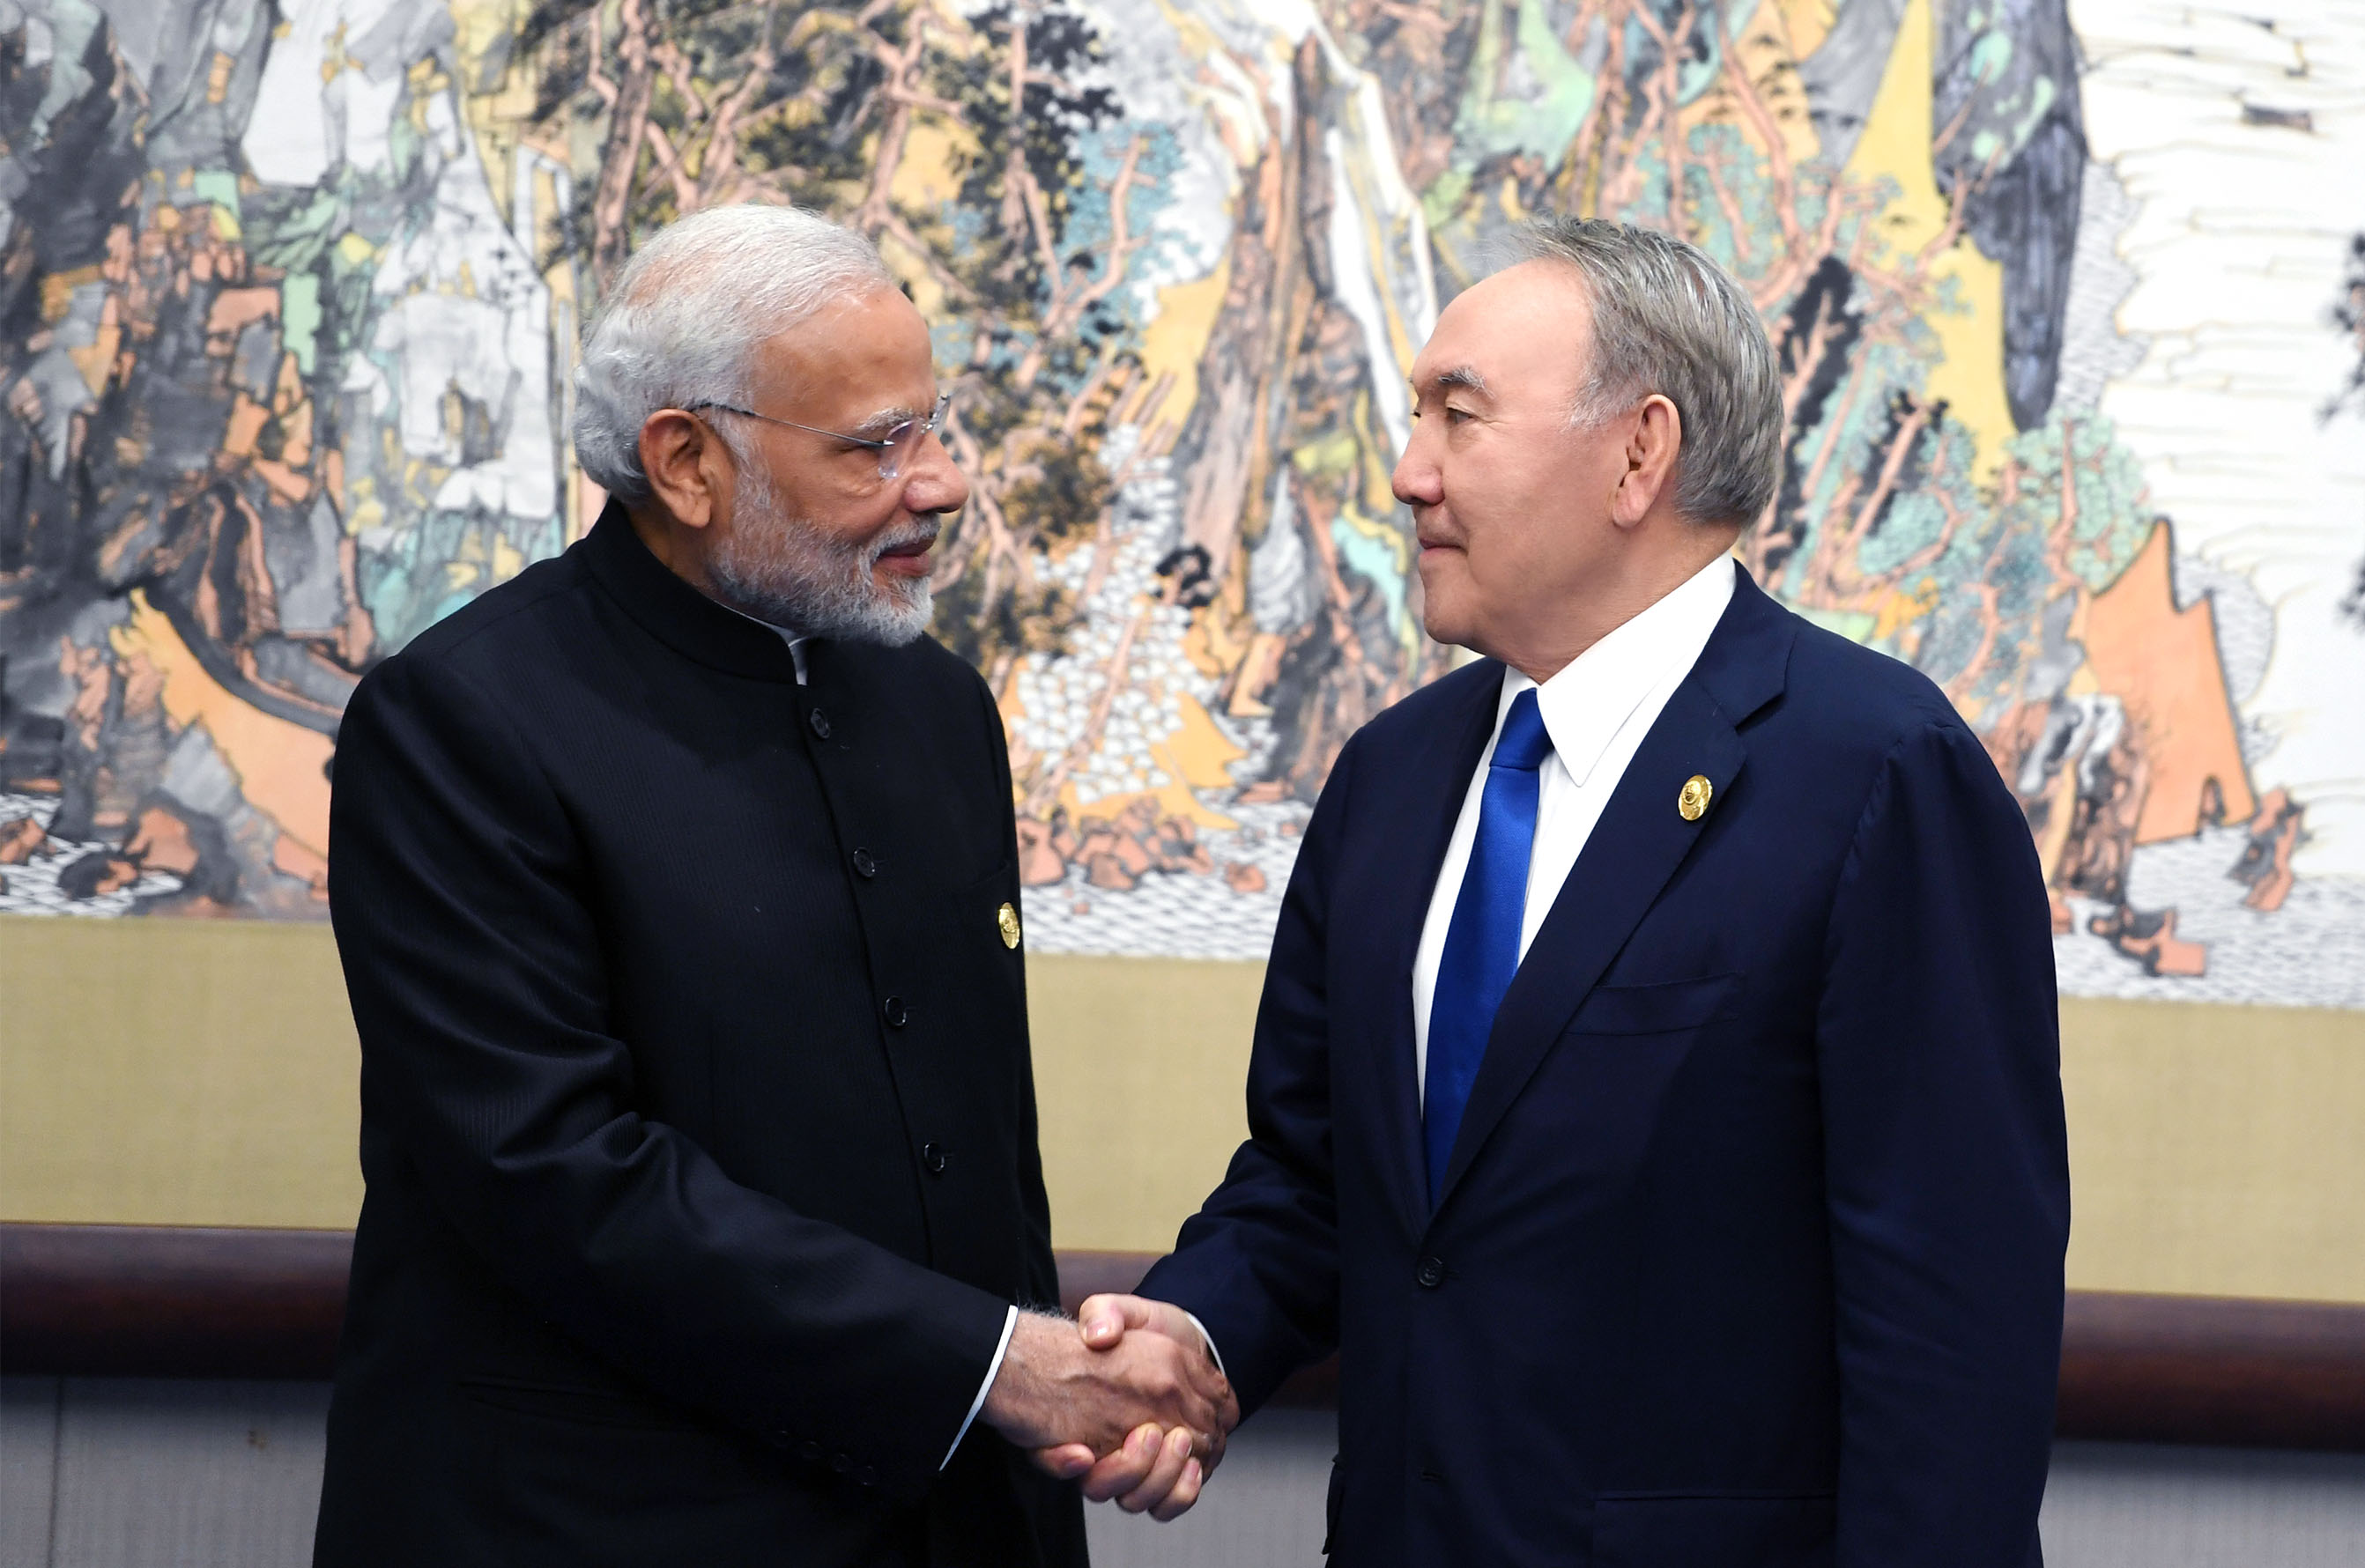 Nursultan Nazarbayev meets with Indian Prime Minister